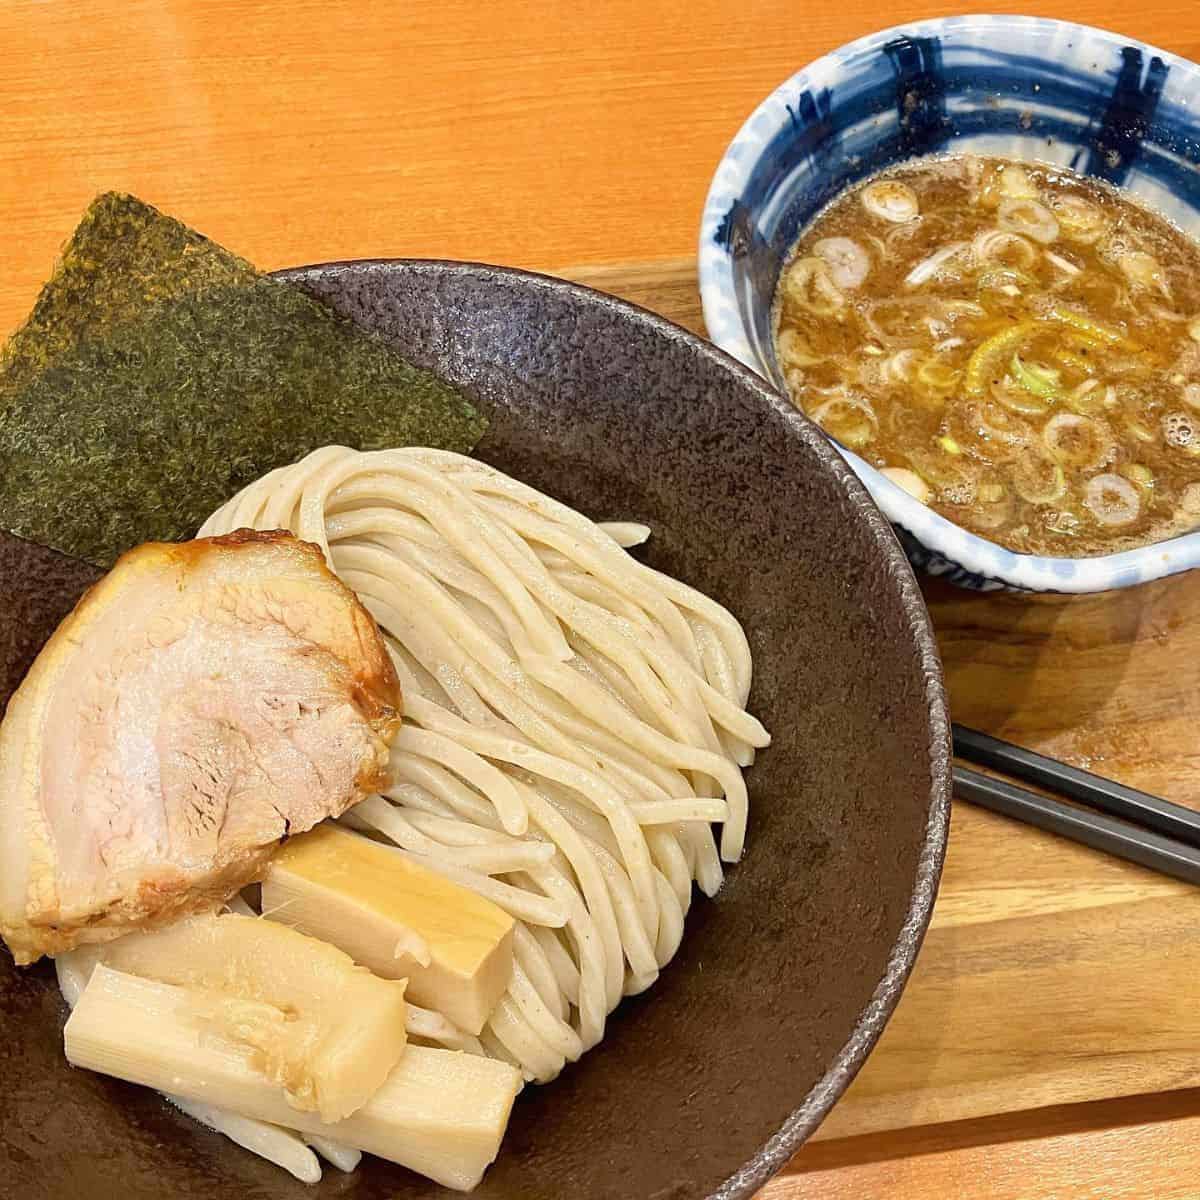 Delicious Tsukemen with seared pork and seaweed